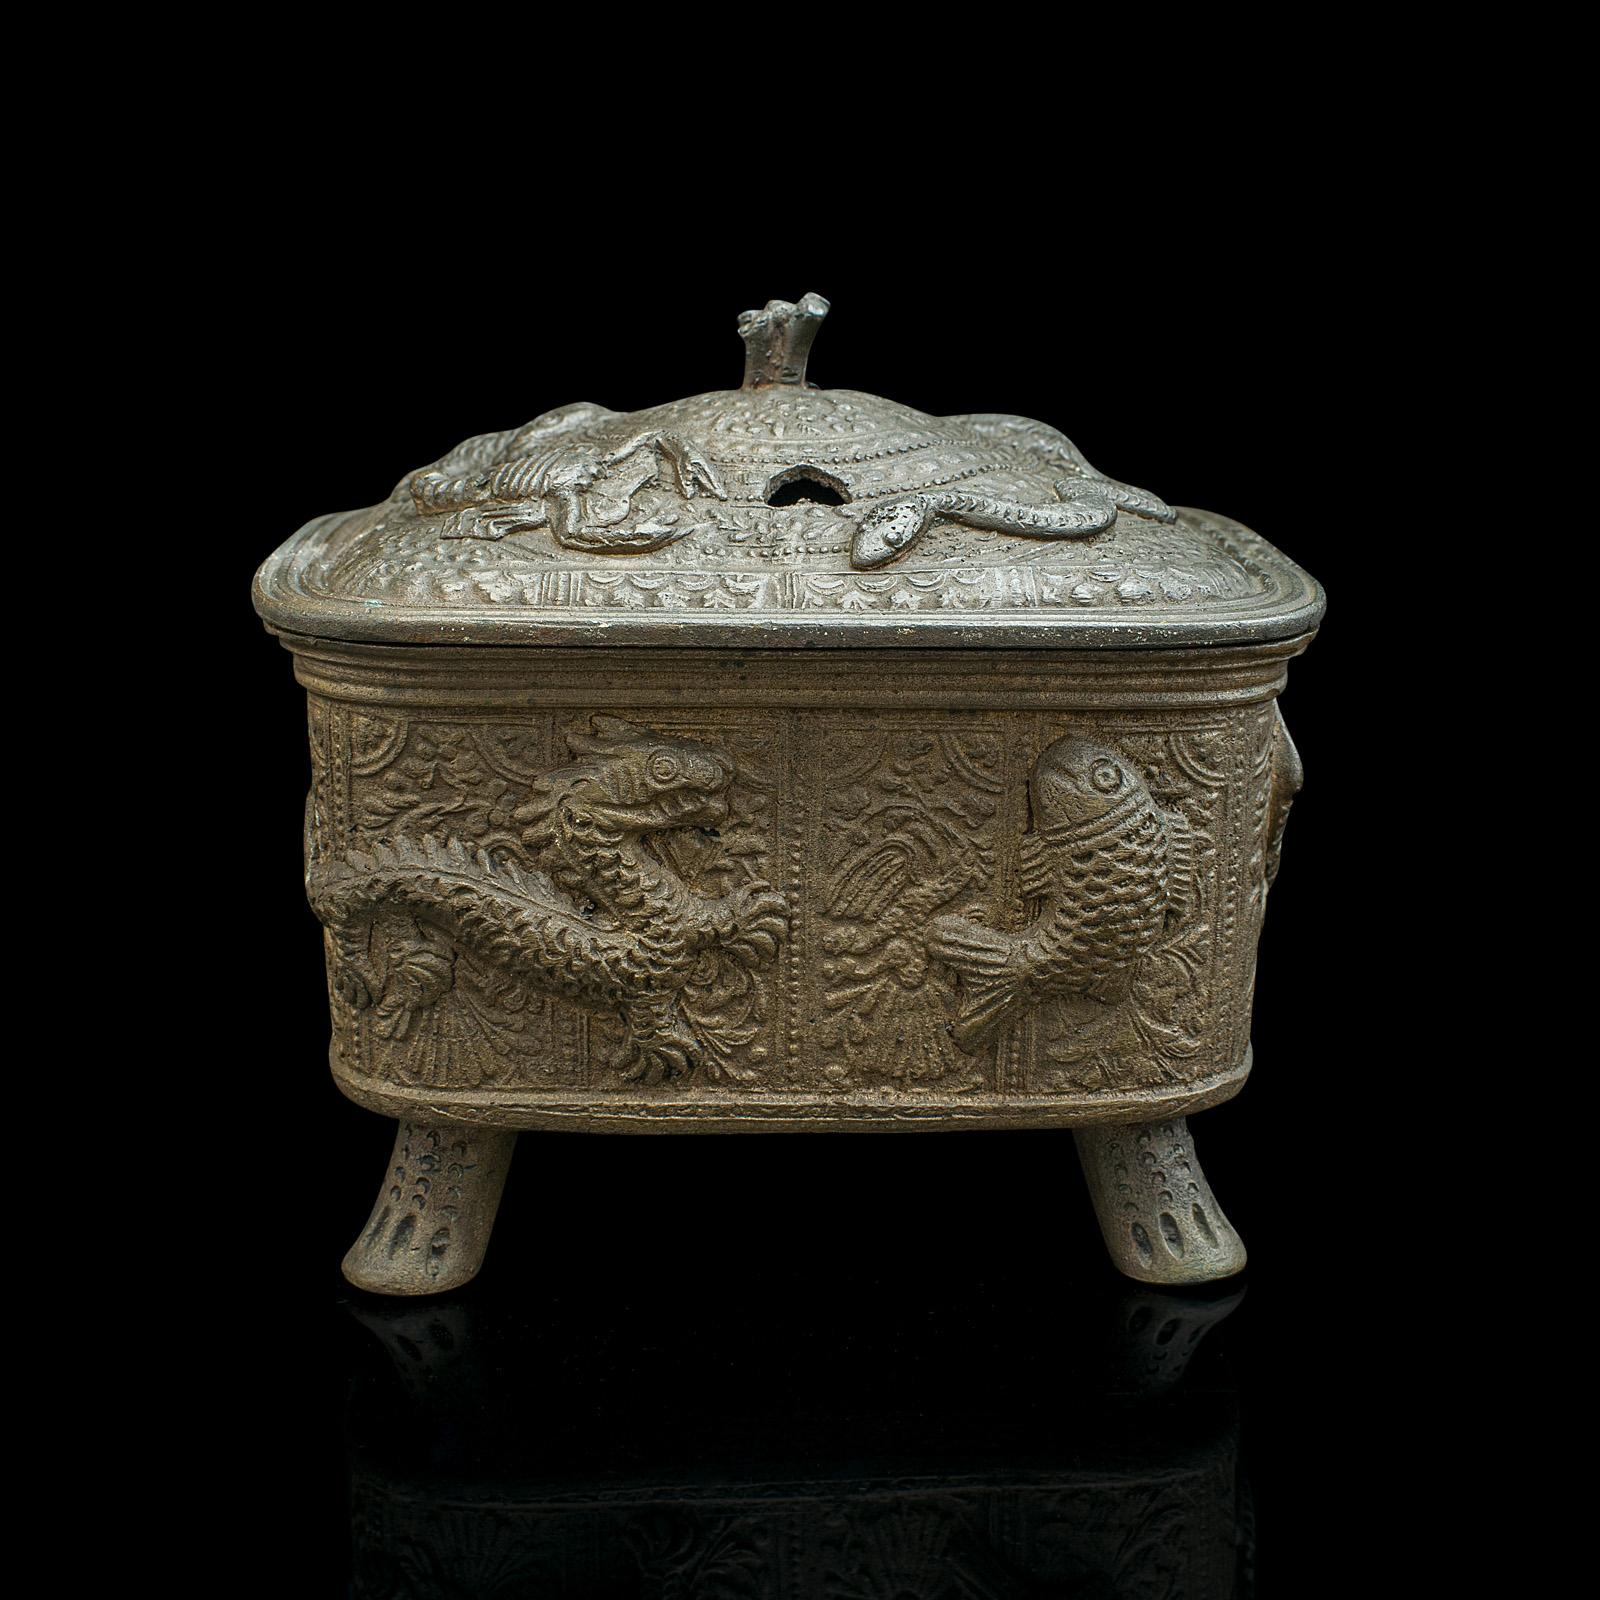 This is an antique decorative censer. A Chinese, bronze incense burner, dating to the early Victorian period, circa 1850.

Delightfully ornate and substantial burner, with appealing finish
Displays a desirable aged patina and in good original